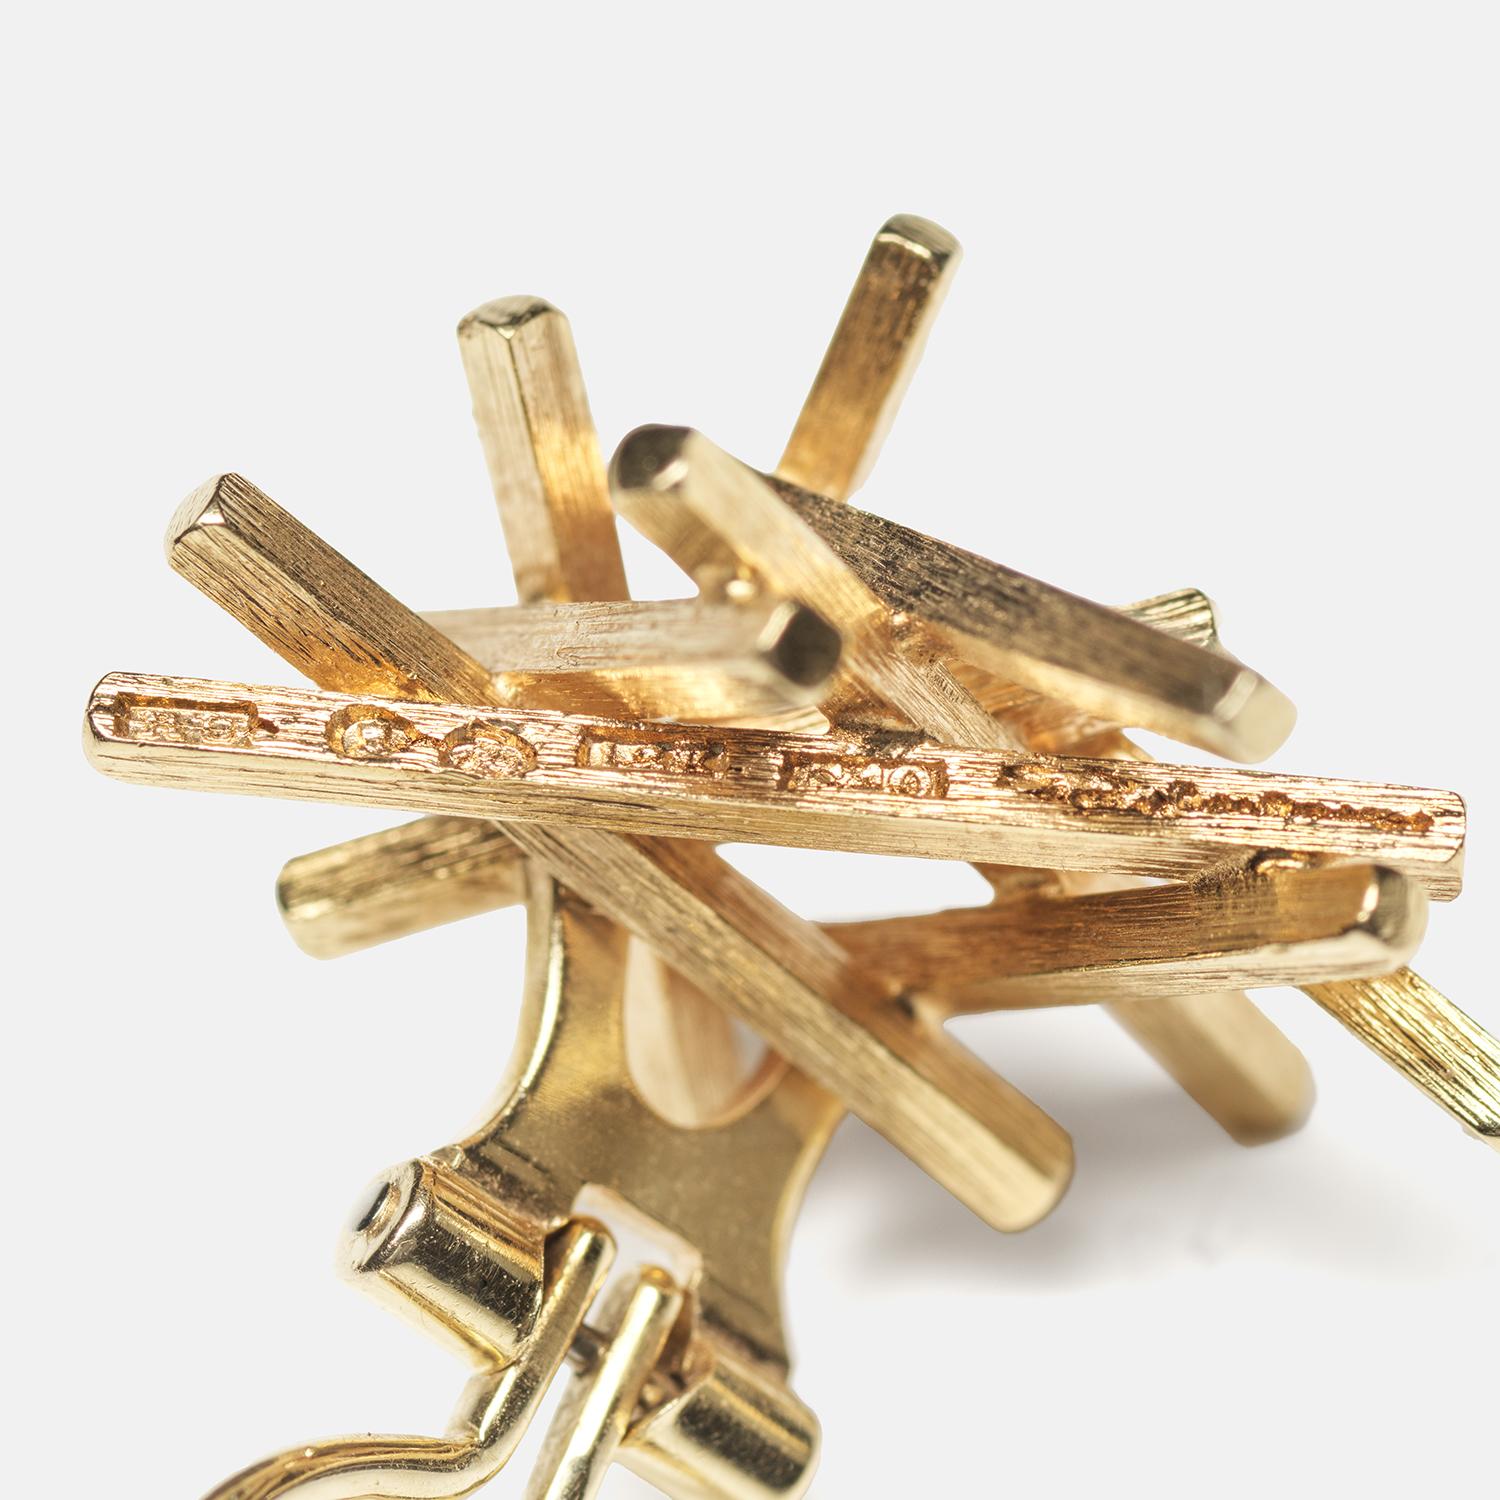 These are 18 karat gold clip earrings featuring a dynamic, abstract bundle of textured gold rods that create an intricate nest-like design. The gold has a rich, brushed finish that adds depth and a soft glow to the earrings. They secure comfortably